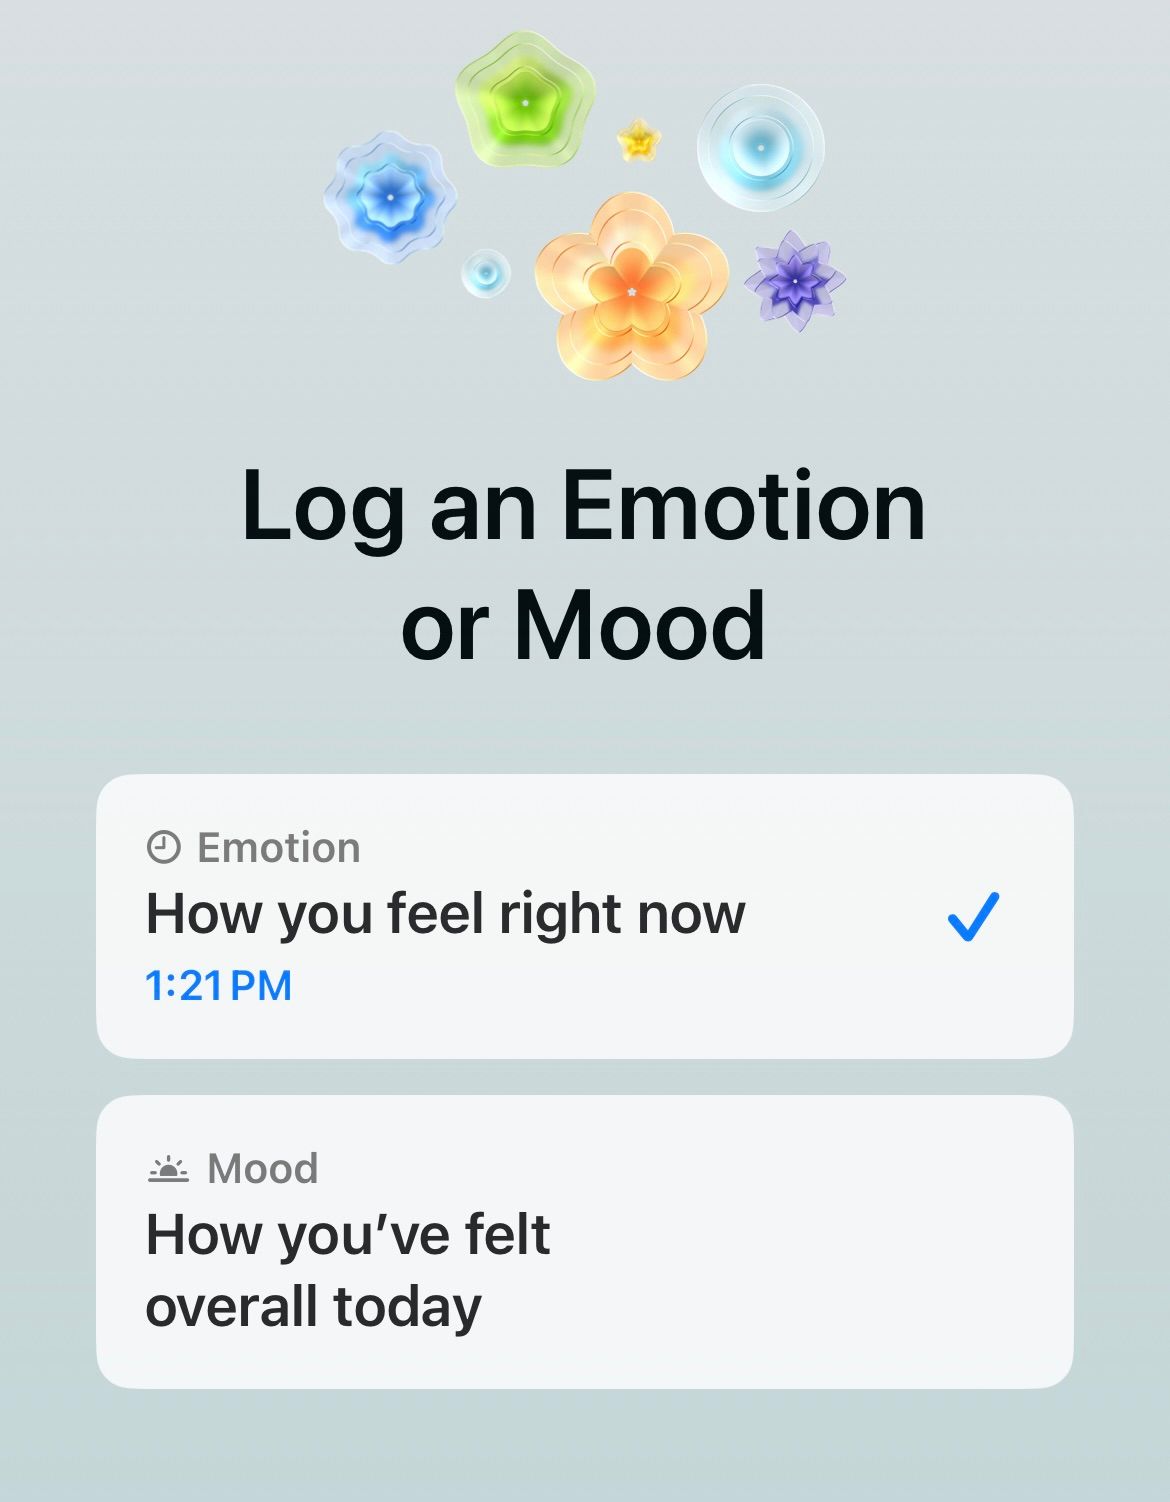 An iPhone screen showing the difference between emotion and mood logging.